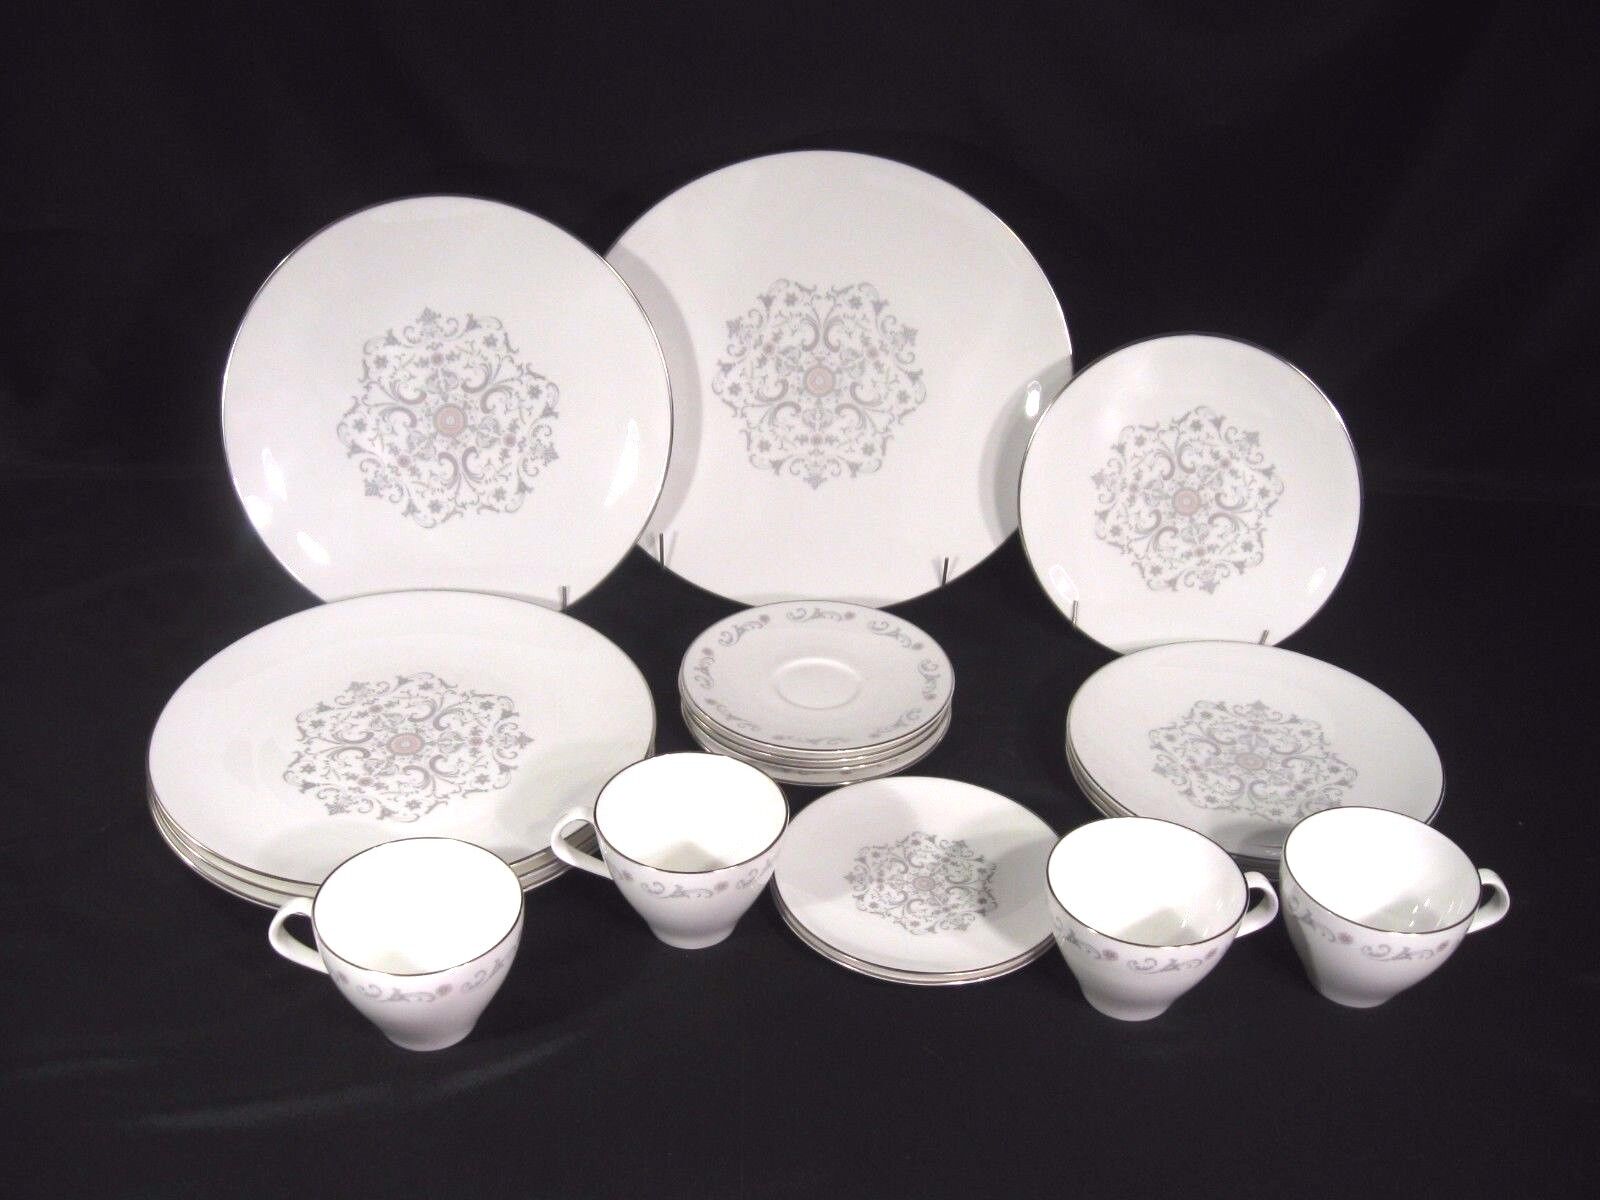 Royal Worcester Bridal Lace China 4 Piece Place Setting for 4 w/ extras 19 pcs.